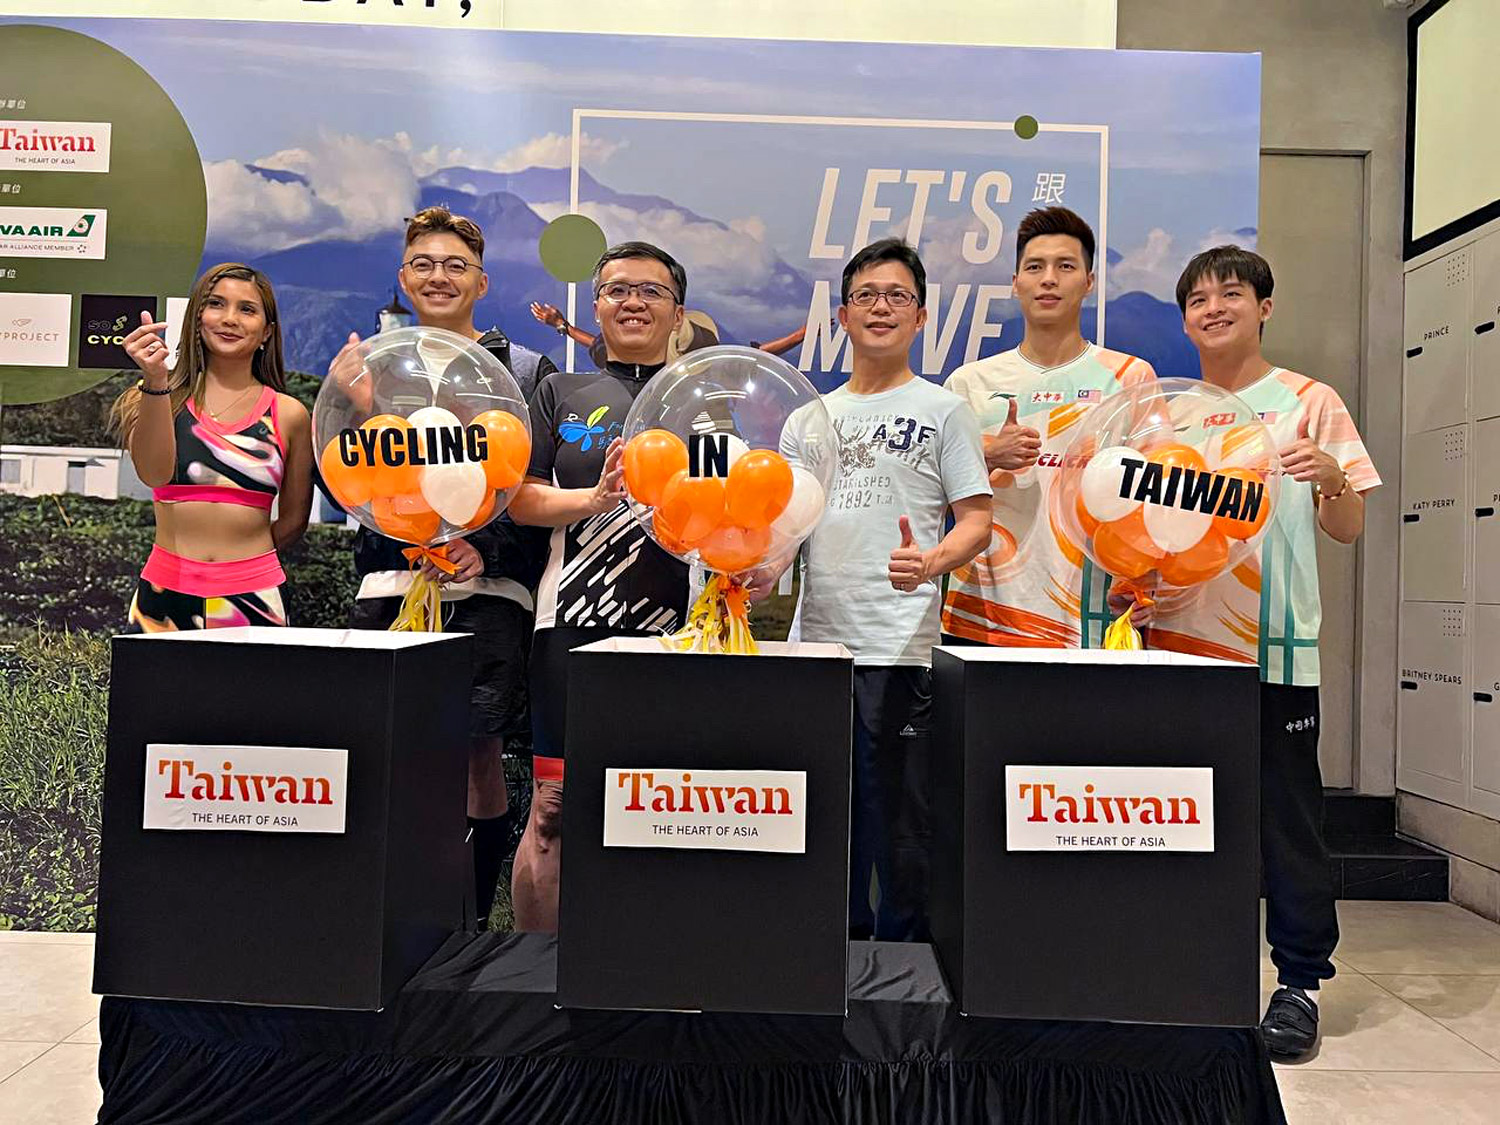 Let’s Move With Taiwan 2022 Indoor Cycling Event